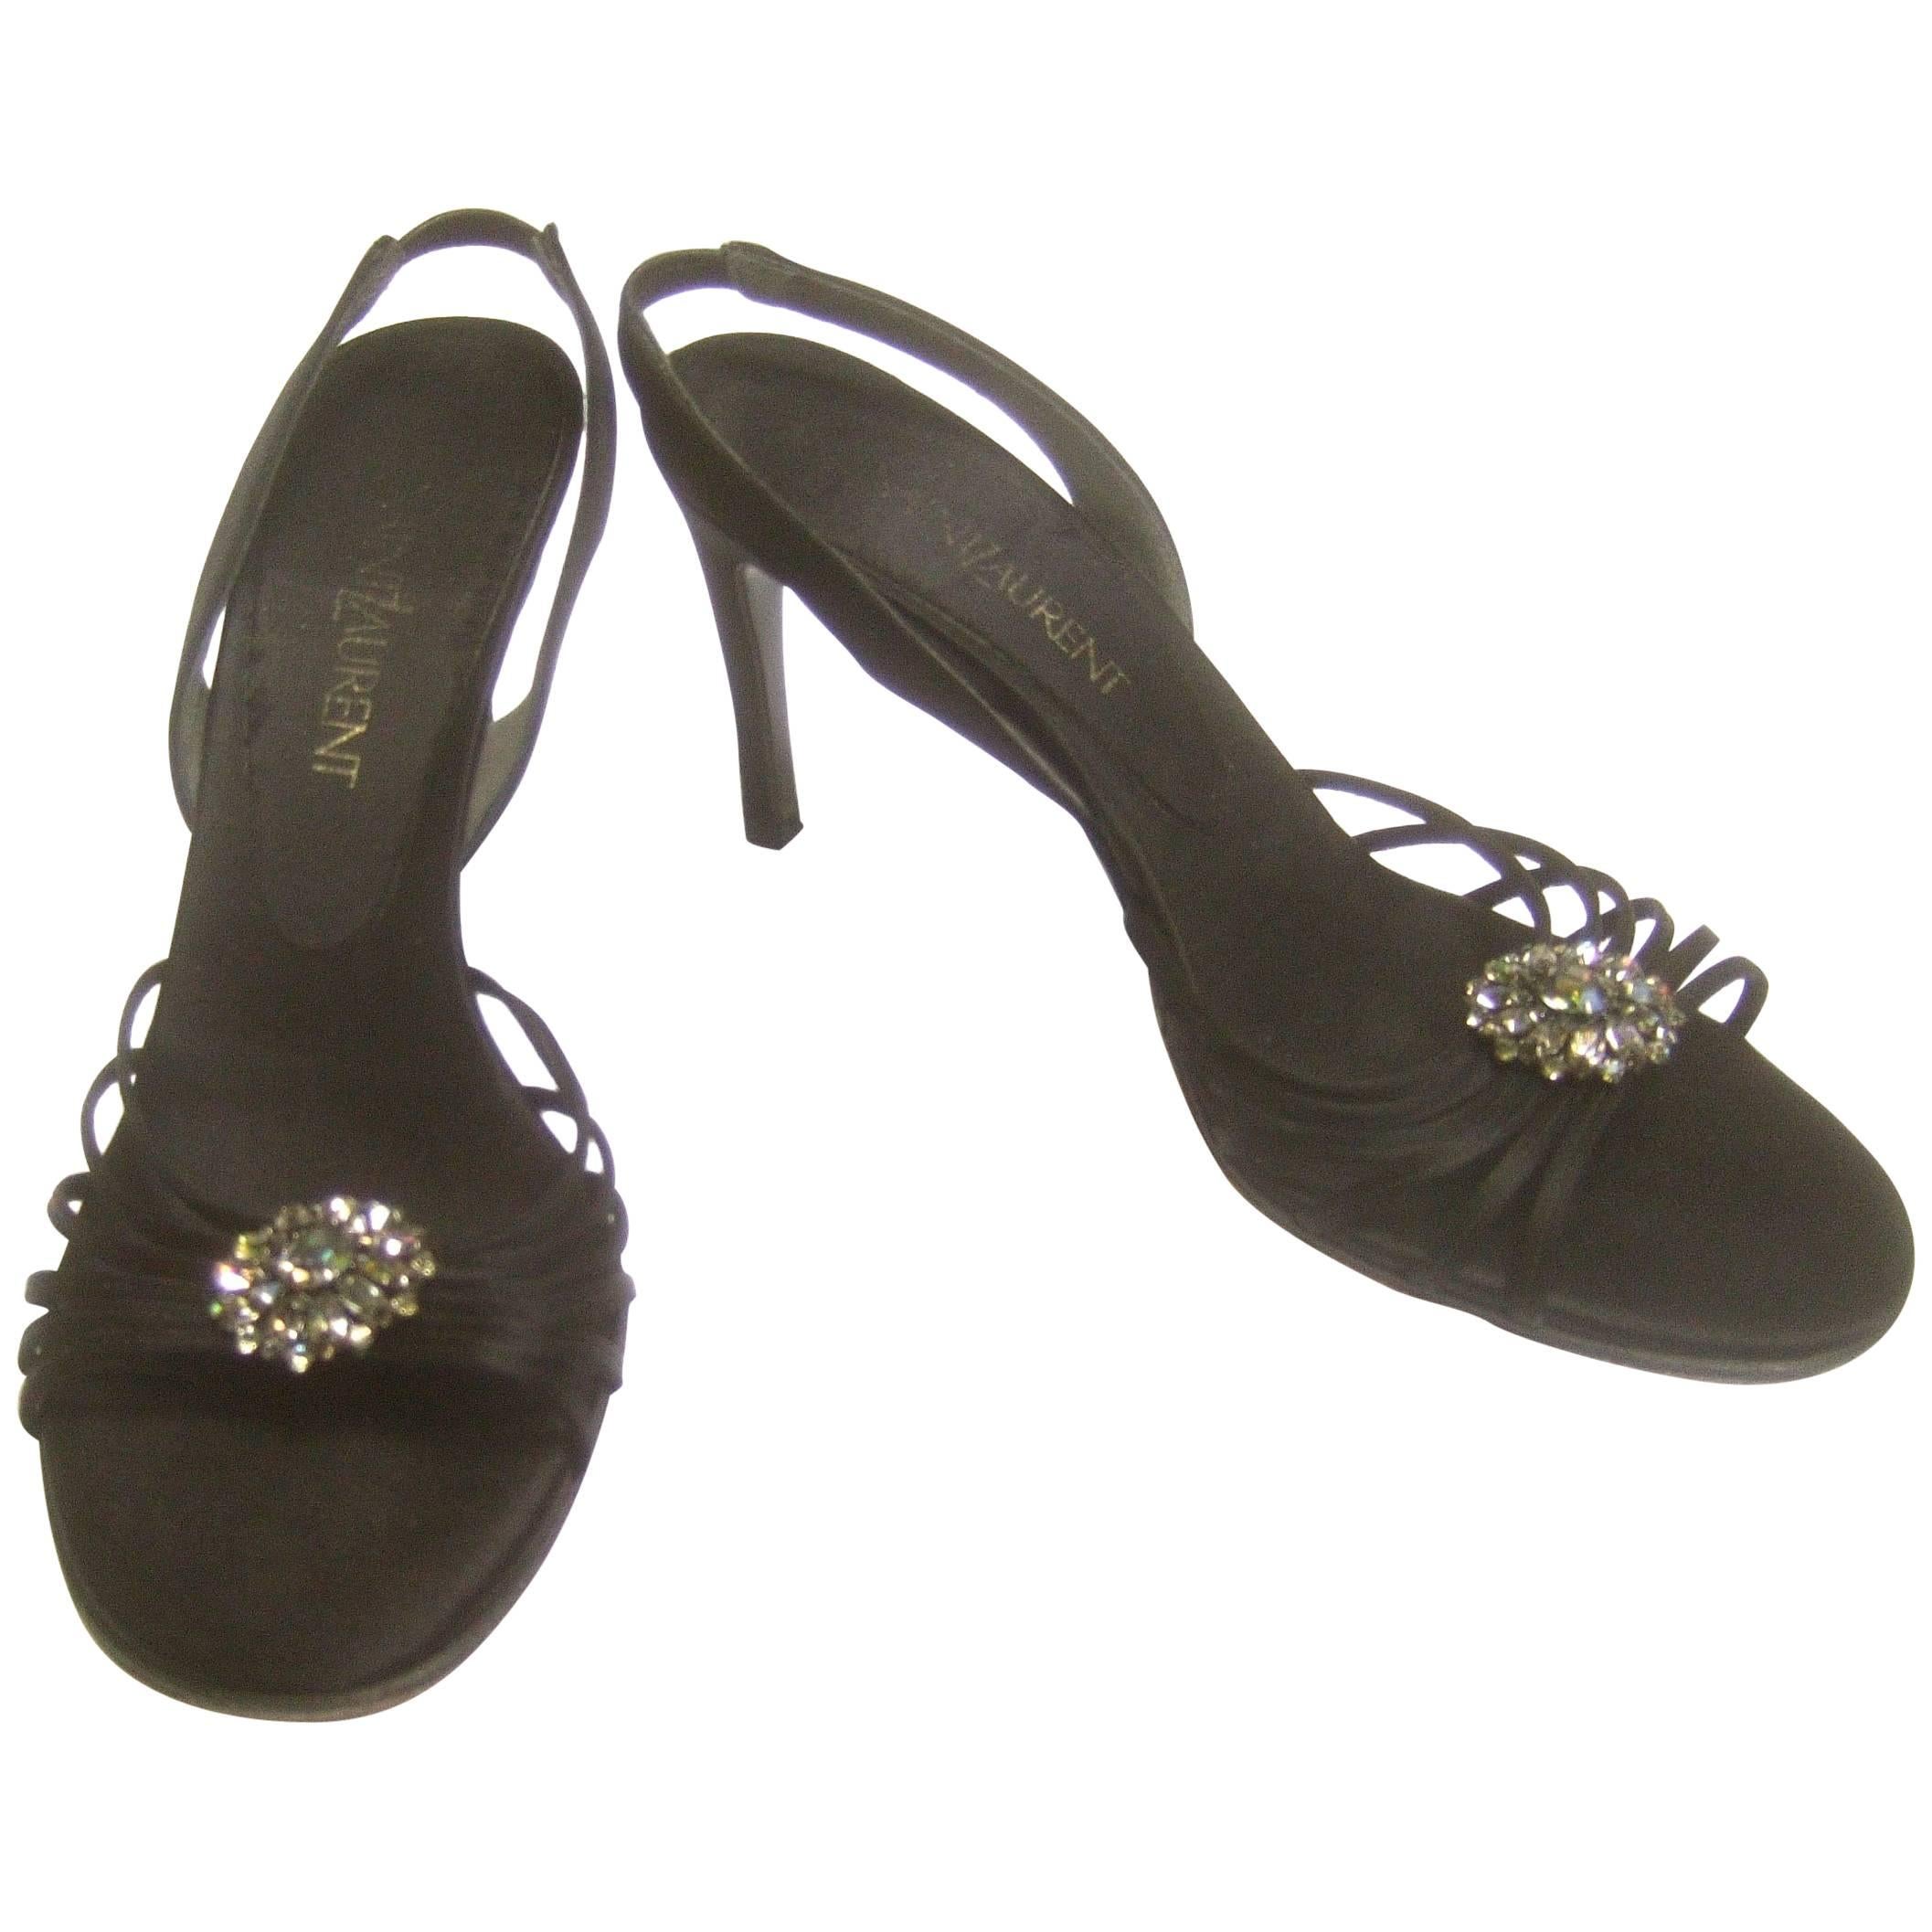 Yves Saint Laurent Black Crystal Satin Pumps in YSL Box Size 7.5 M For Sale